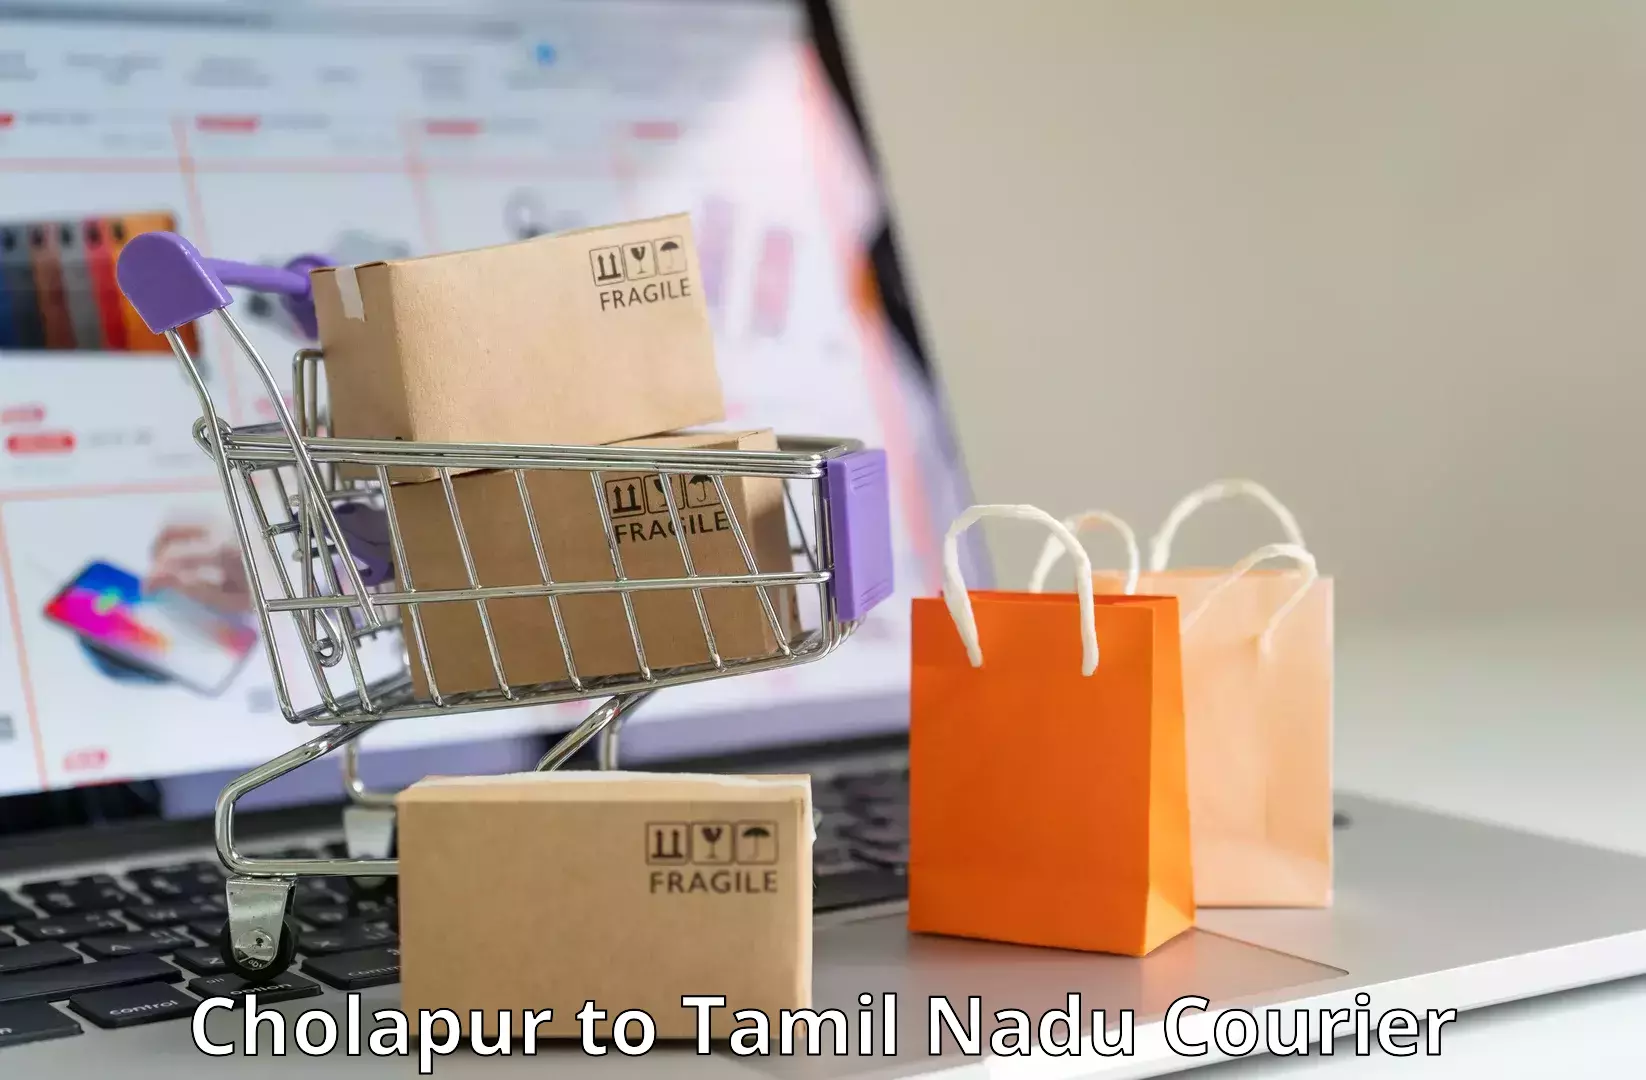 Full-service courier options Cholapur to Tamil Nadu